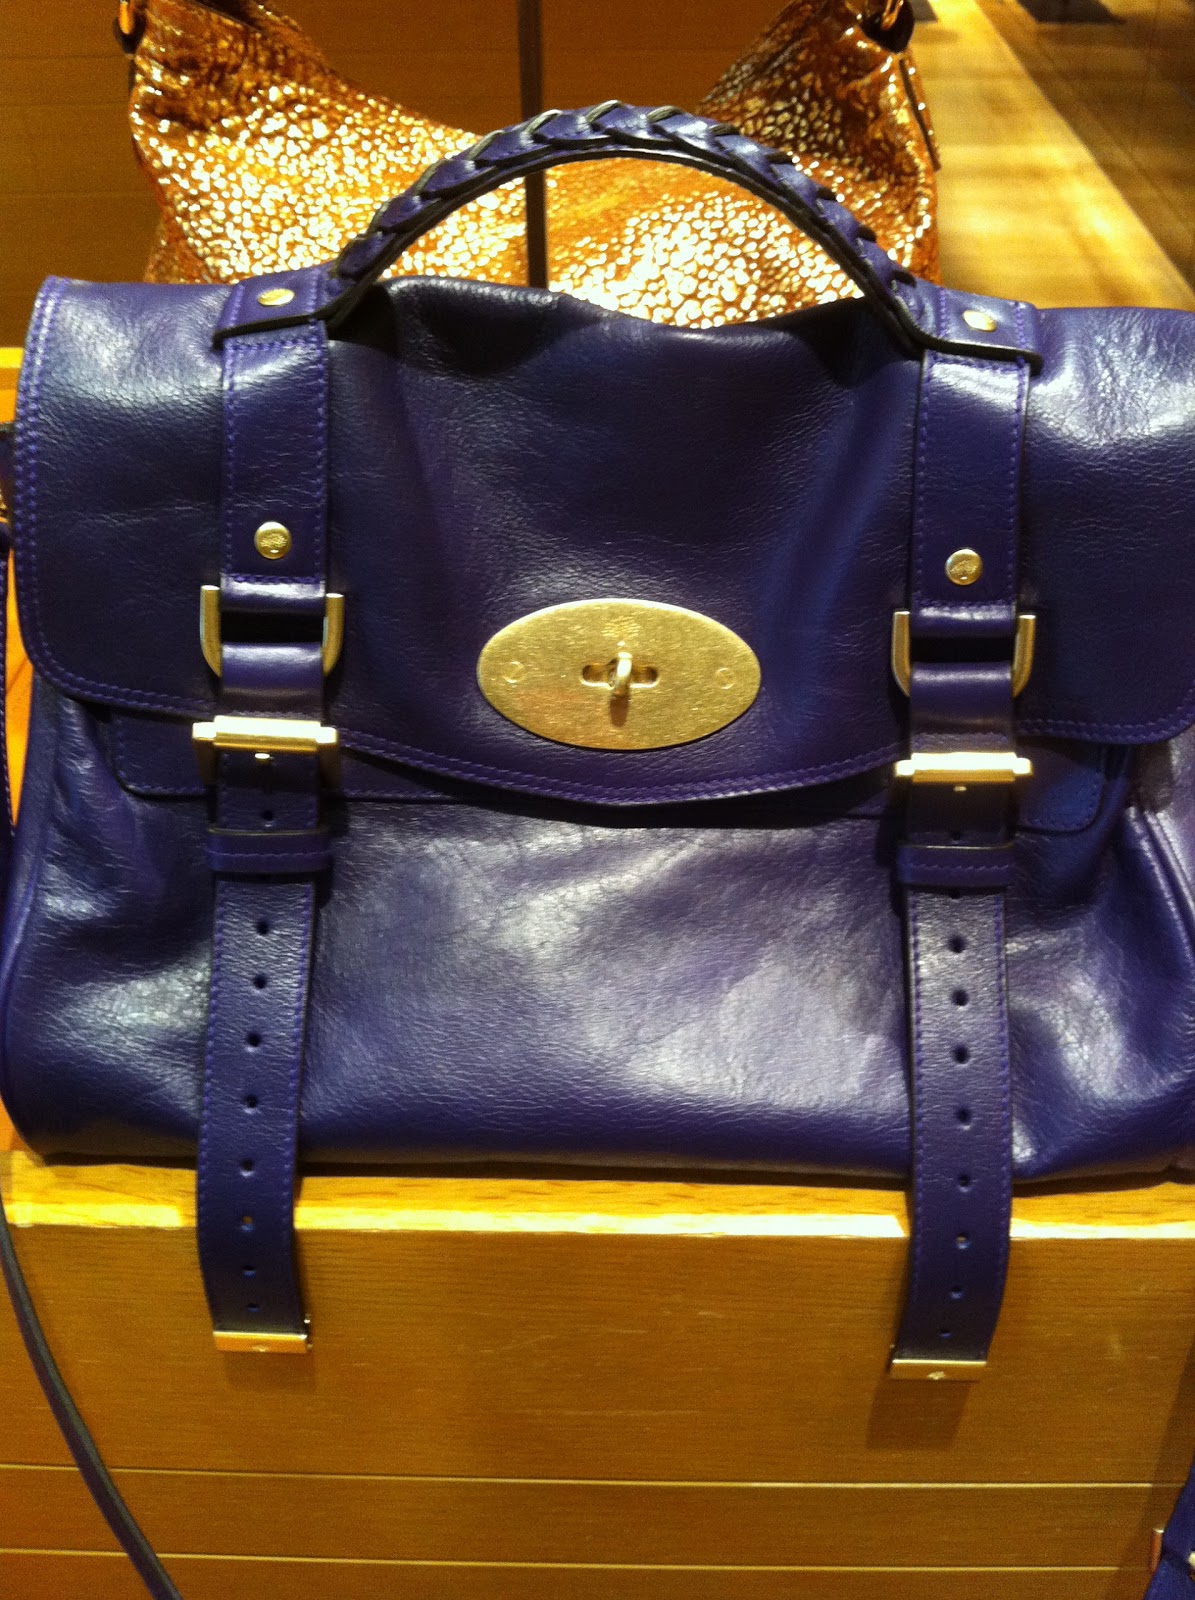 Mulberry Alexa Bag Review + How To Get A Mulberry Discount